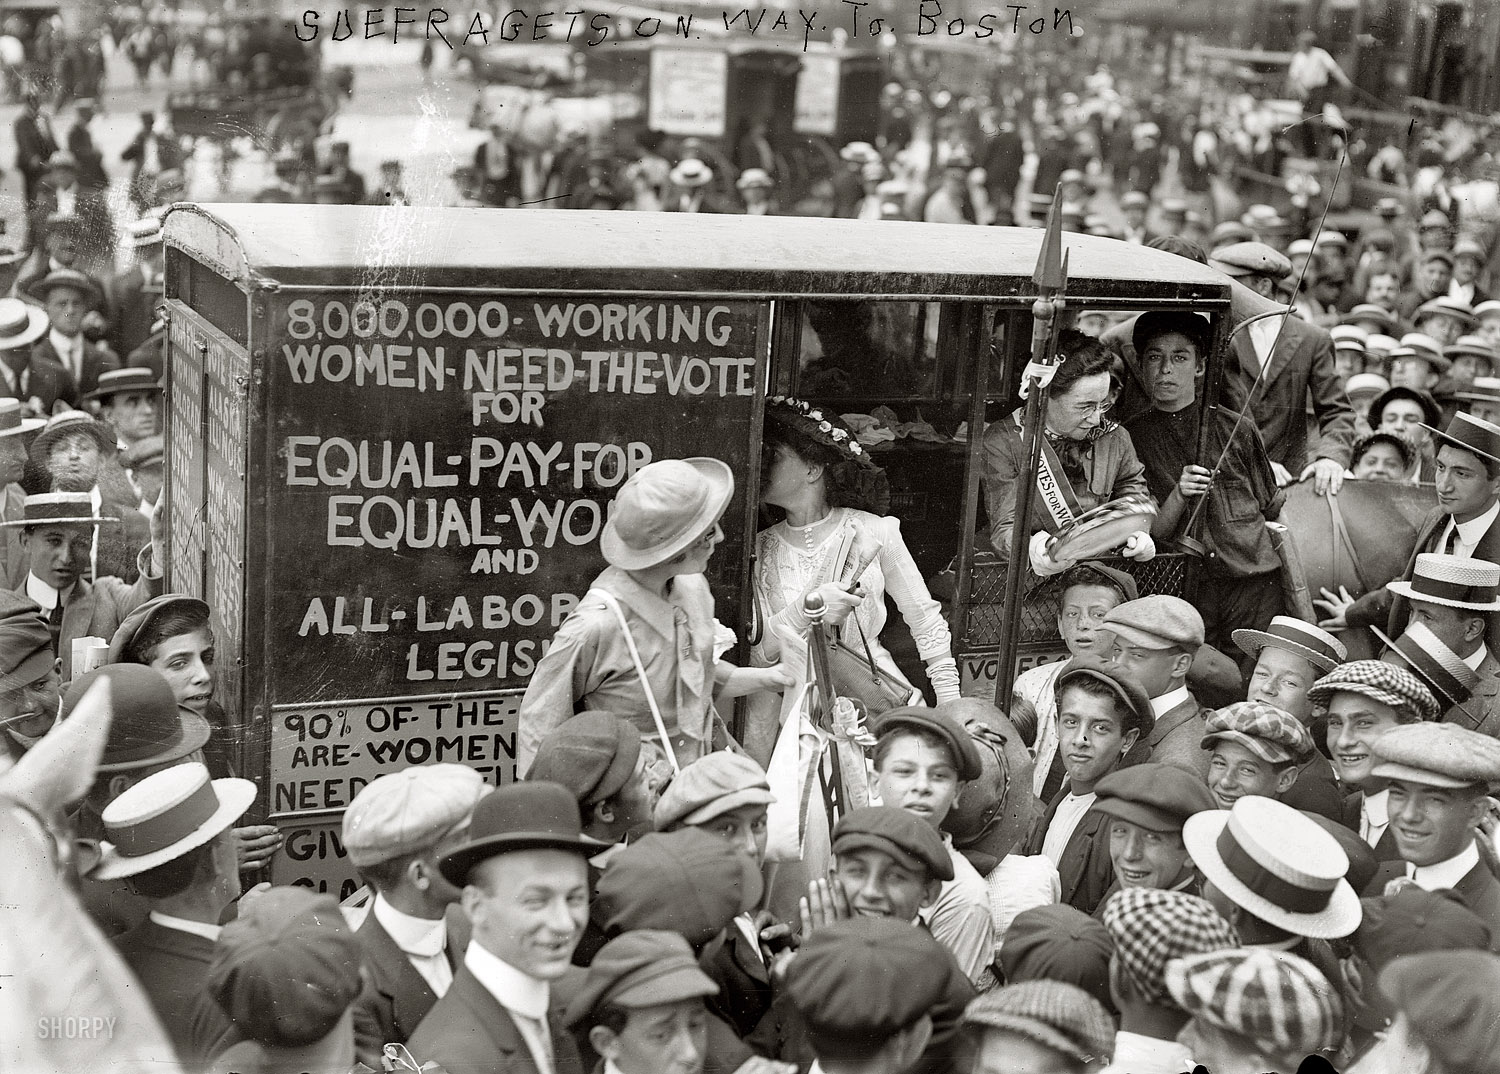 New York, August 1913. "Suffragettes on way to Boston." Our second look at the "suffrage caravan" campaign for women's voting rights. Which seems to have drawn quite a crowd. 5x7 glass negative, G.G. Bain Collection. View full size.